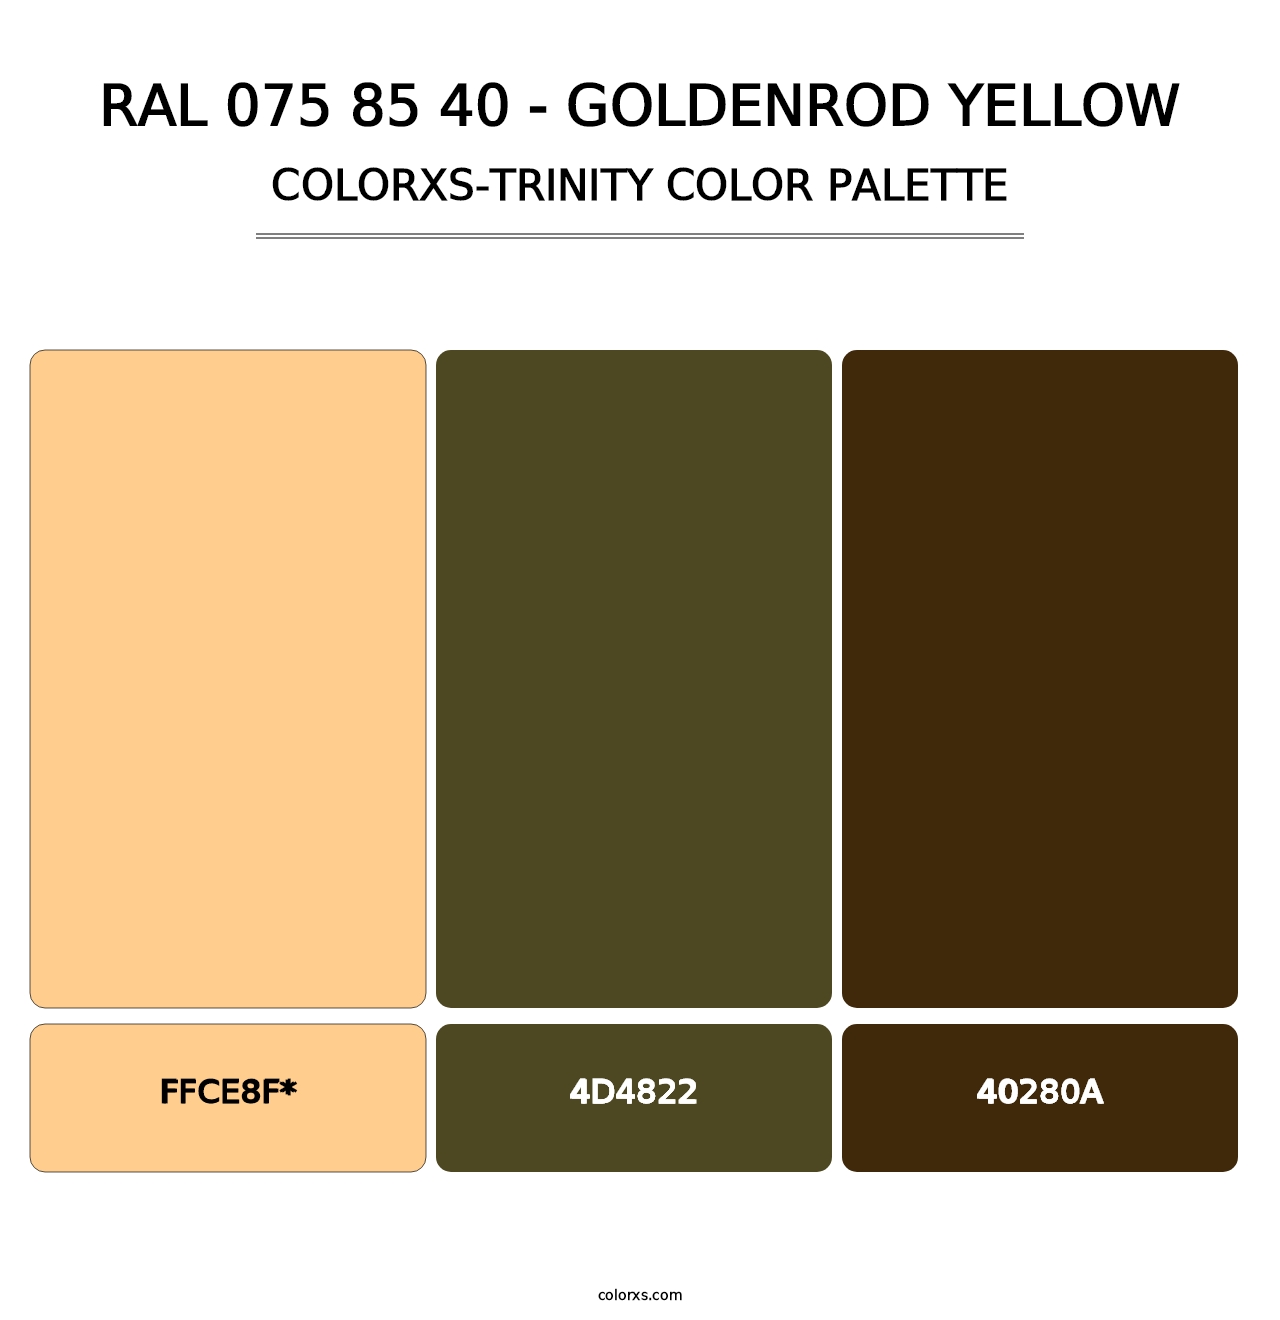 RAL 075 85 40 - Goldenrod Yellow - Colorxs Trinity Palette